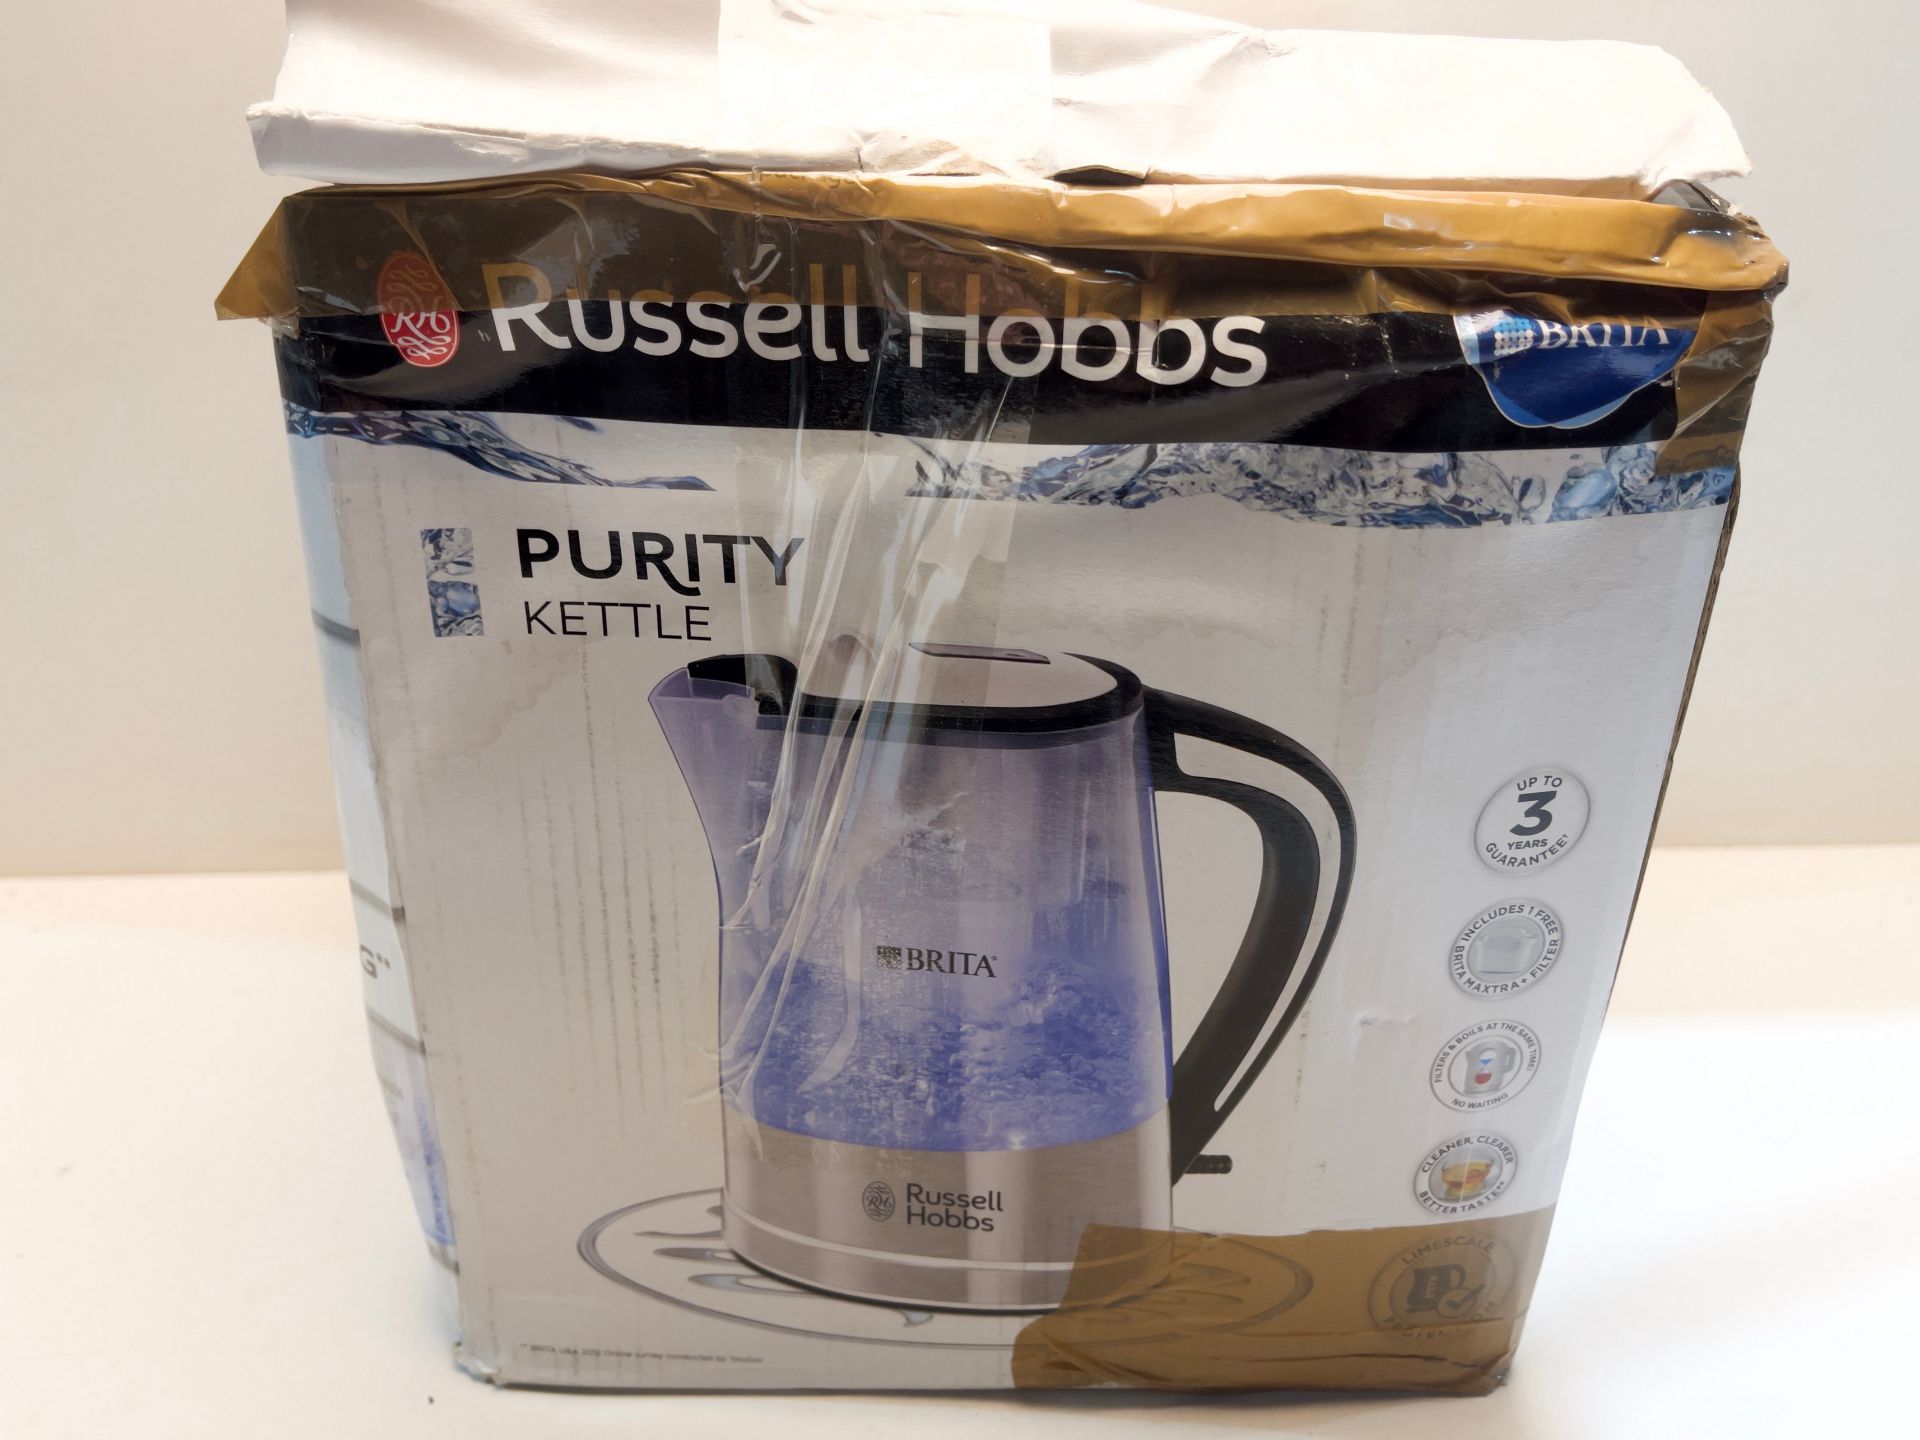 Russell Hobbs 22851 Brita Filter Purity Electric Kettle, Illuminating Filter Kettle with Brita